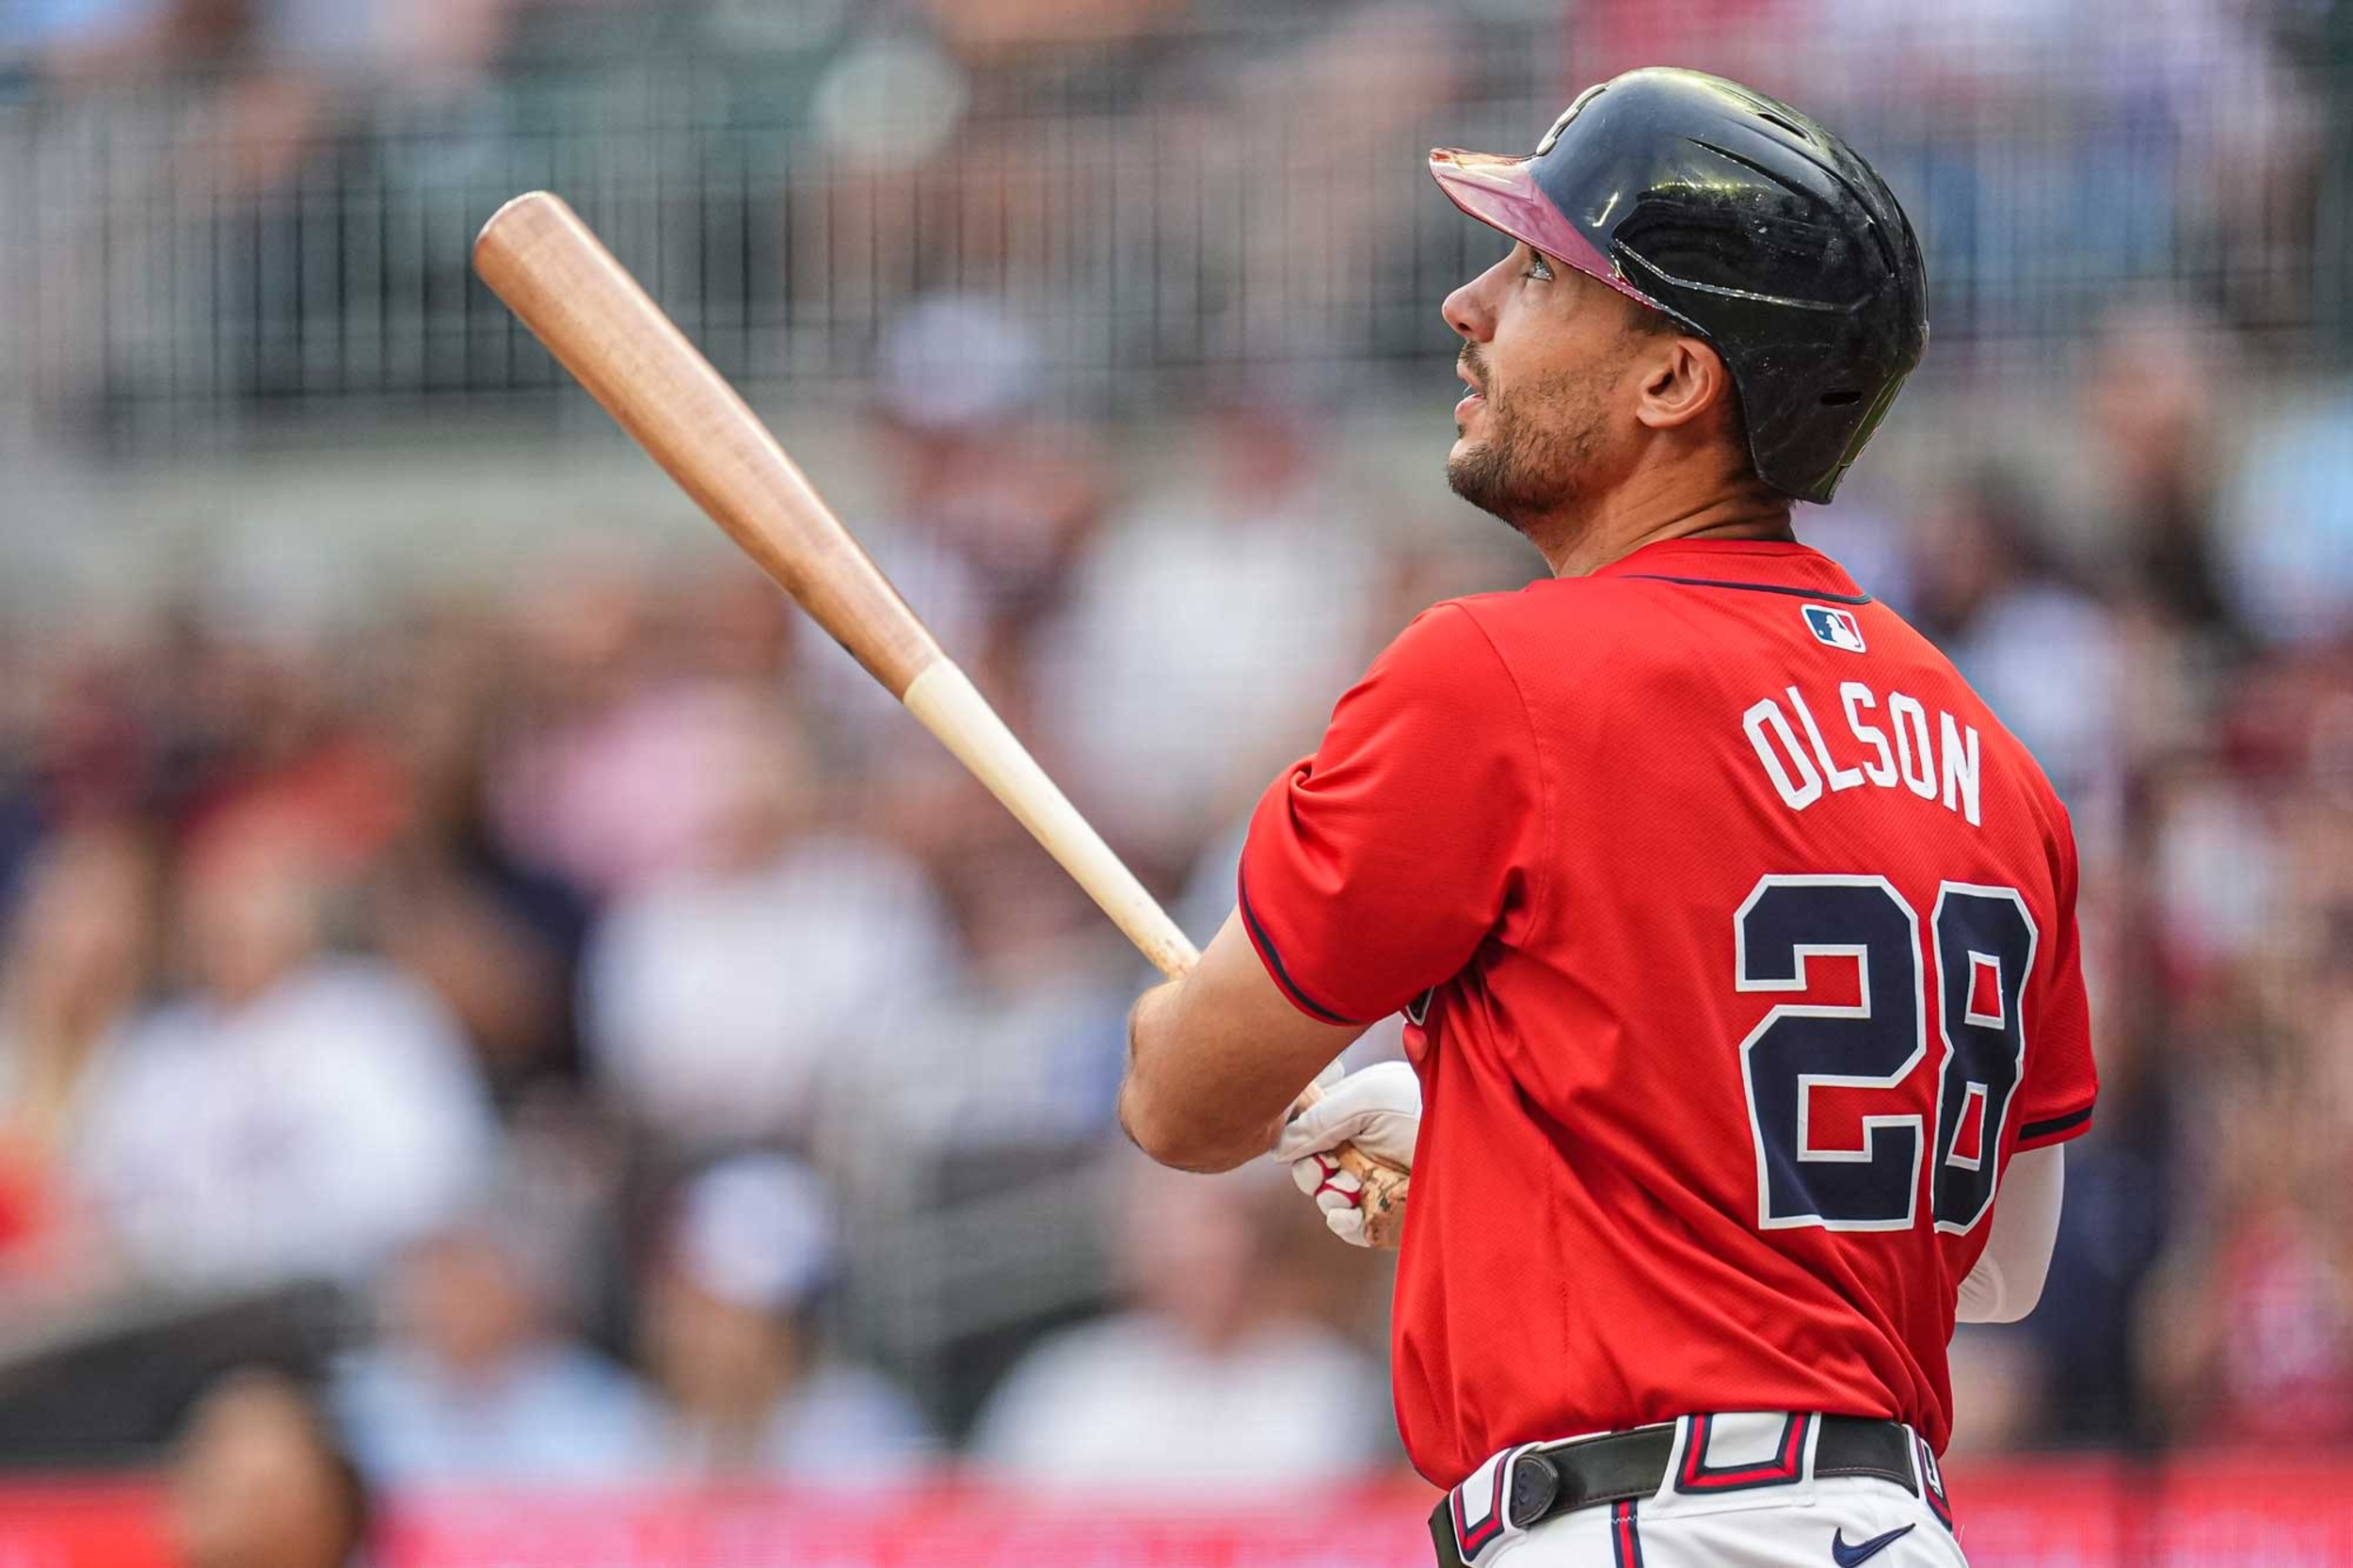 <p>Olson led baseball with 54 home runs and 139 RBI last season, but he's off to a slow start this year. While still hitting the ball hard, Olson has hit only .235-9-34 in 61 games.</p><p>You may also like: <a href='https://www.yardbarker.com/mlb/articles/the_25_most_memorable_world_series_home_runs/s1__38887960'>The 25 most memorable World Series home runs</a></p>